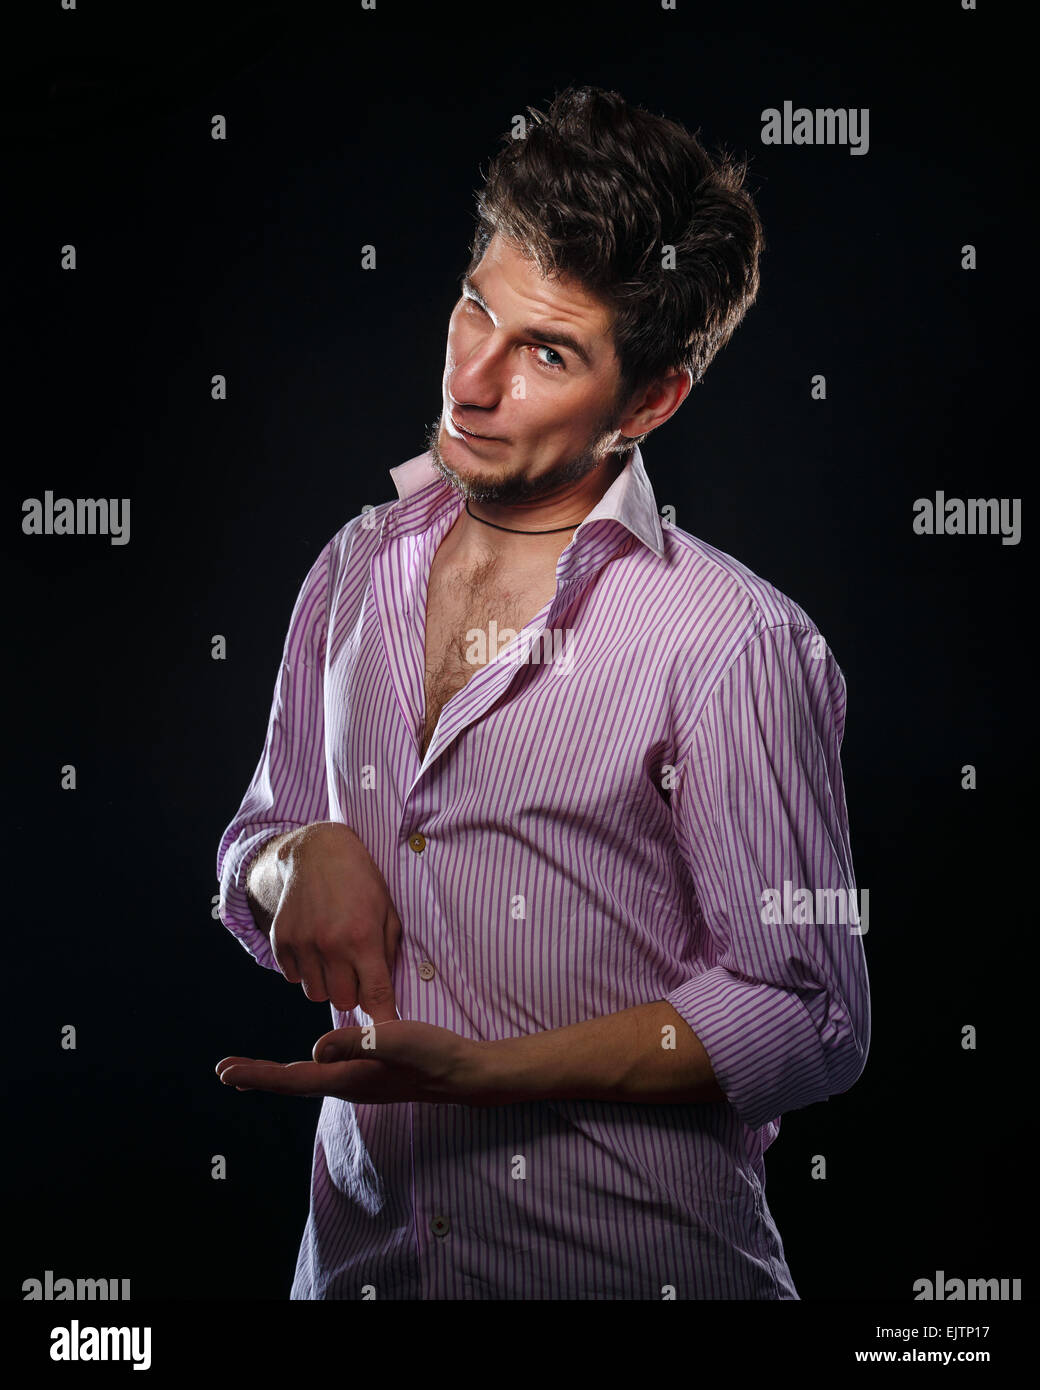 Portrait of a young shy man on a black background in the studio. A man wearing a shirt. Stock Photo